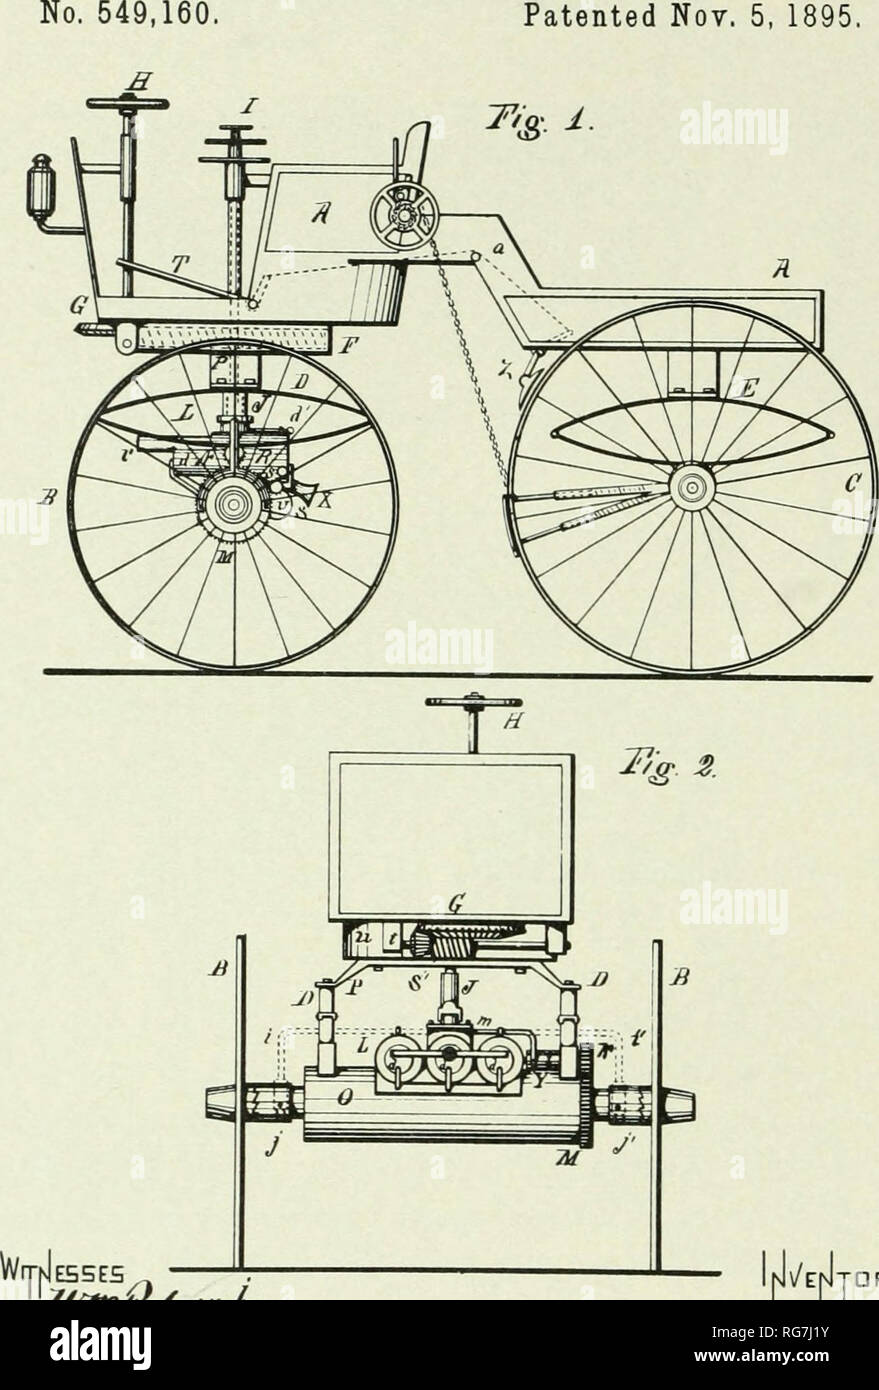 Bulletin - United States National Museum. Science. An American Industry is Born 2 Sheets—Sheet 1. G. B. SELDEN. ROAD ENGINE. Patented Nov. 5, 1895.. n/entdf? Figure 14. — Drawings from Selden's